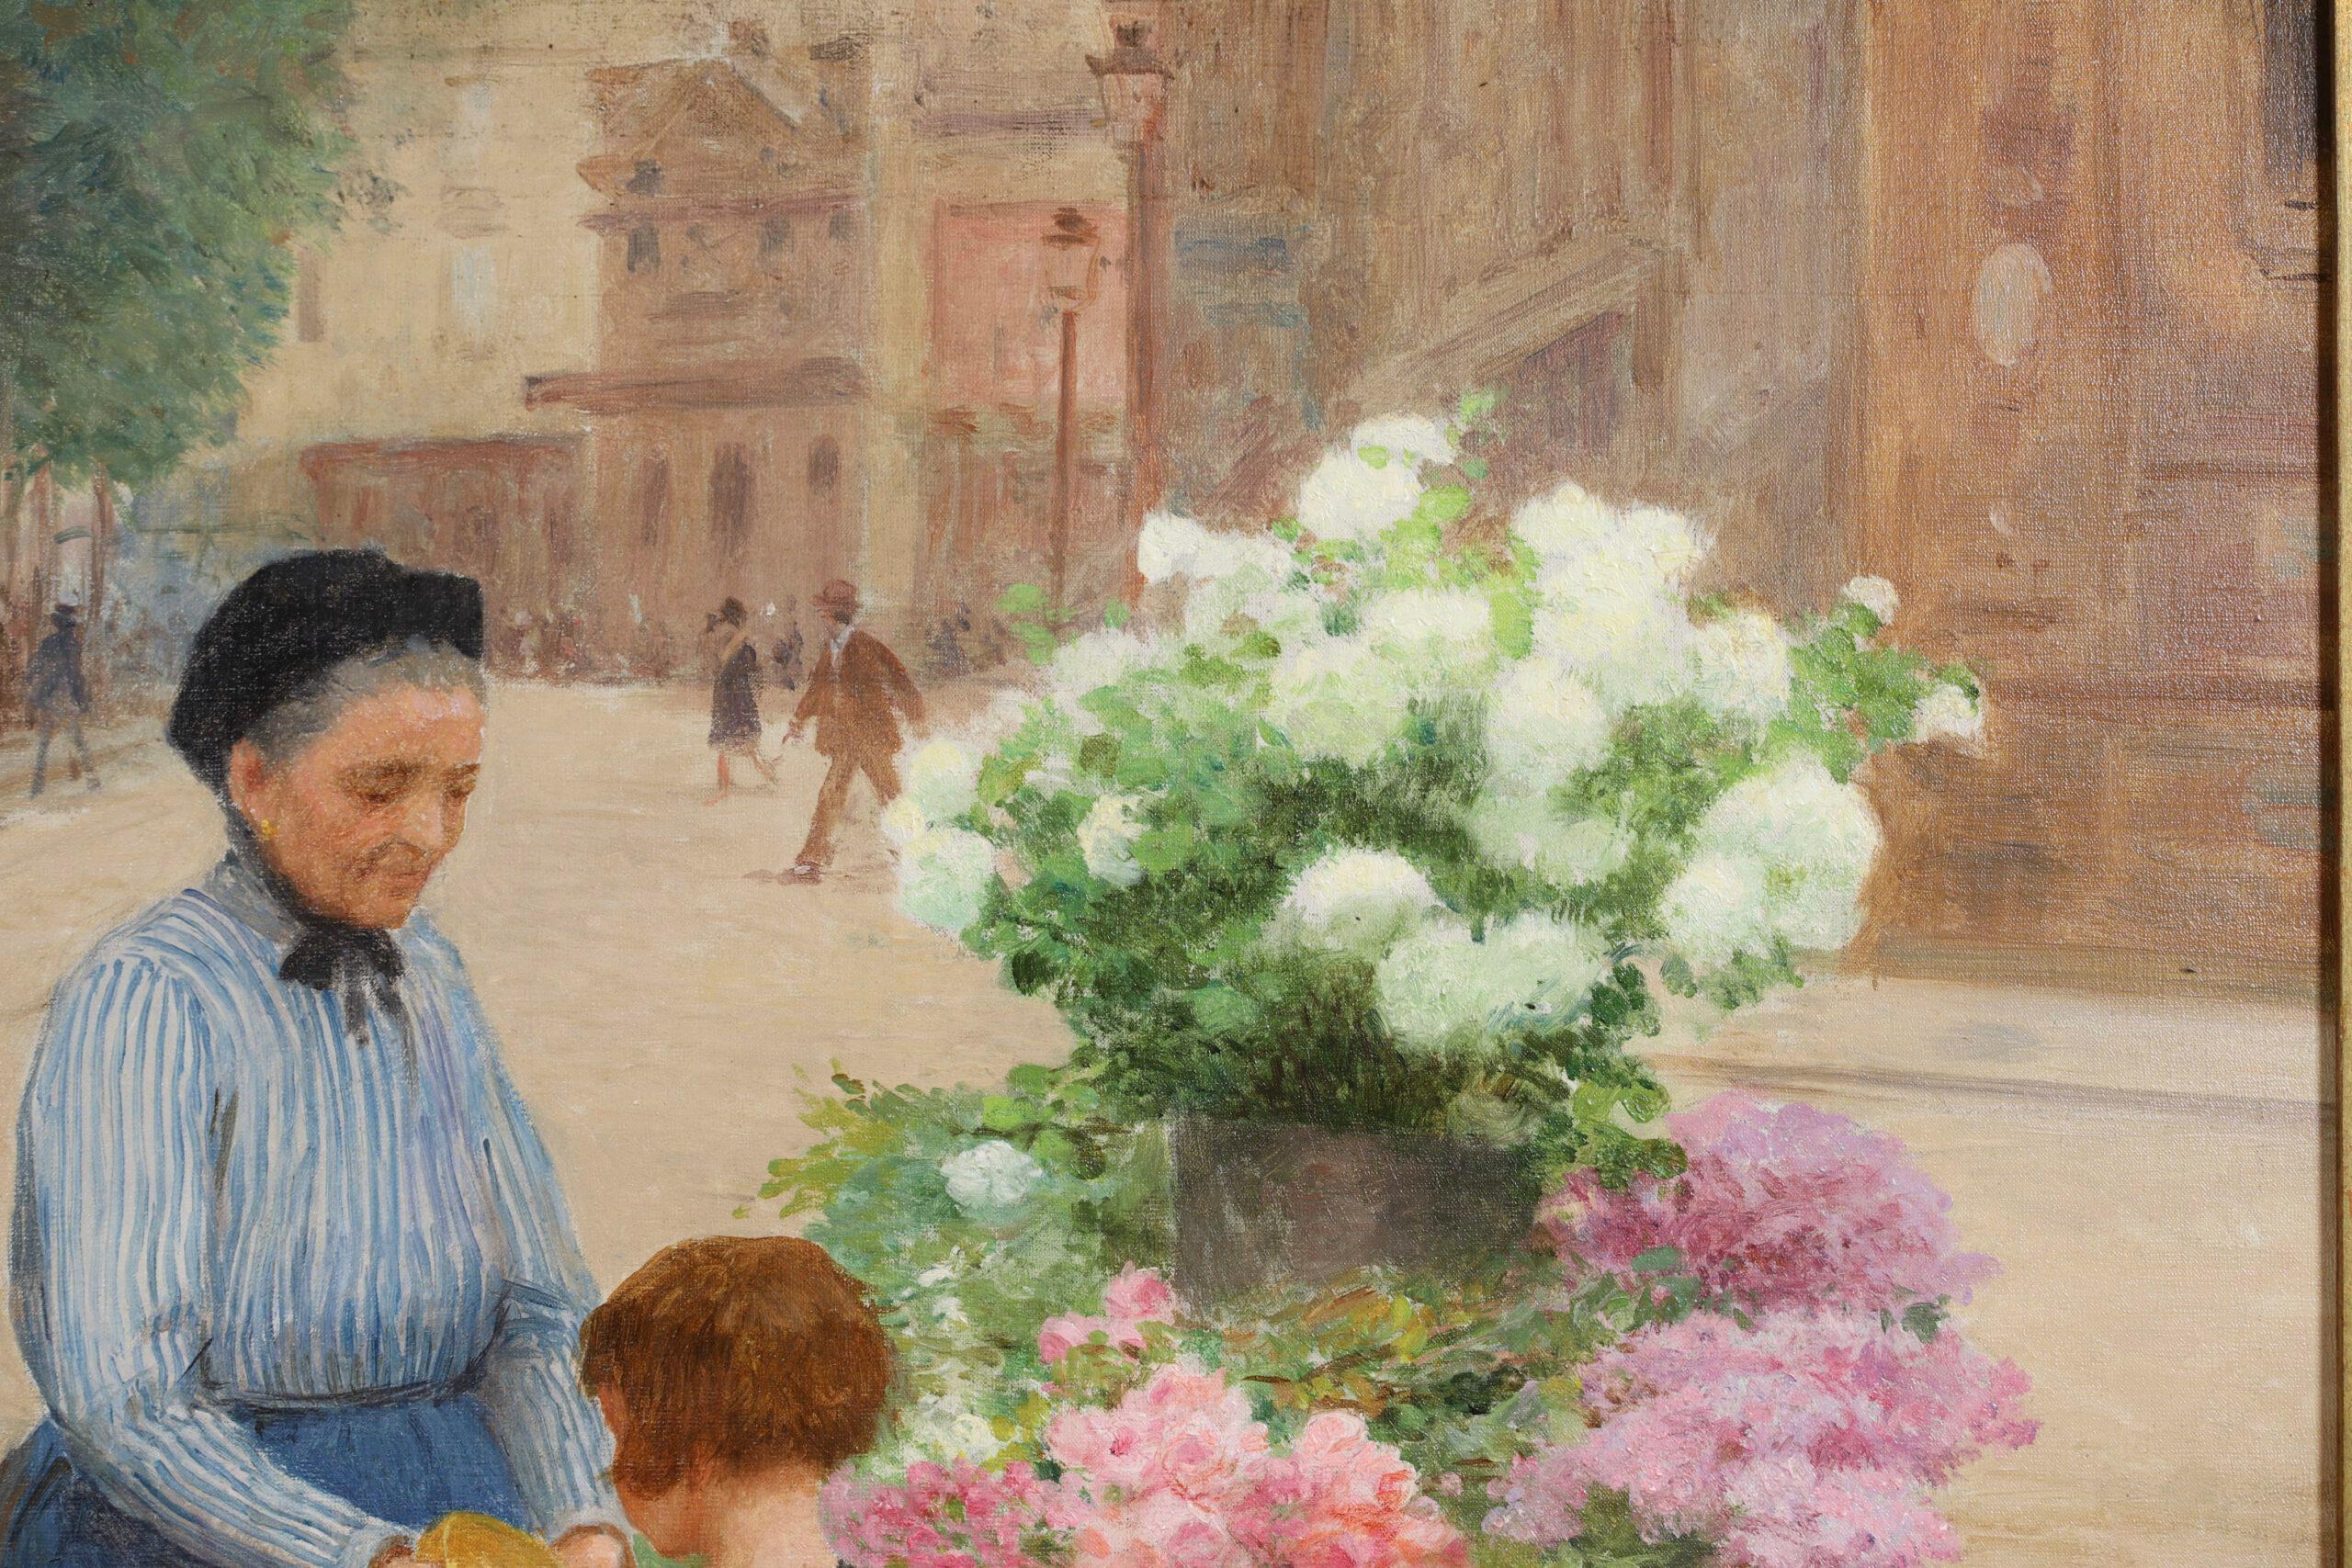 Signed figurative oil on original canvas by French realist painter Victor Gabriel Gilbert. The work shows a flower seller filling a young girl's basket with cherries while a little boy cheekily steals one from her cart. The busy Parisian street can